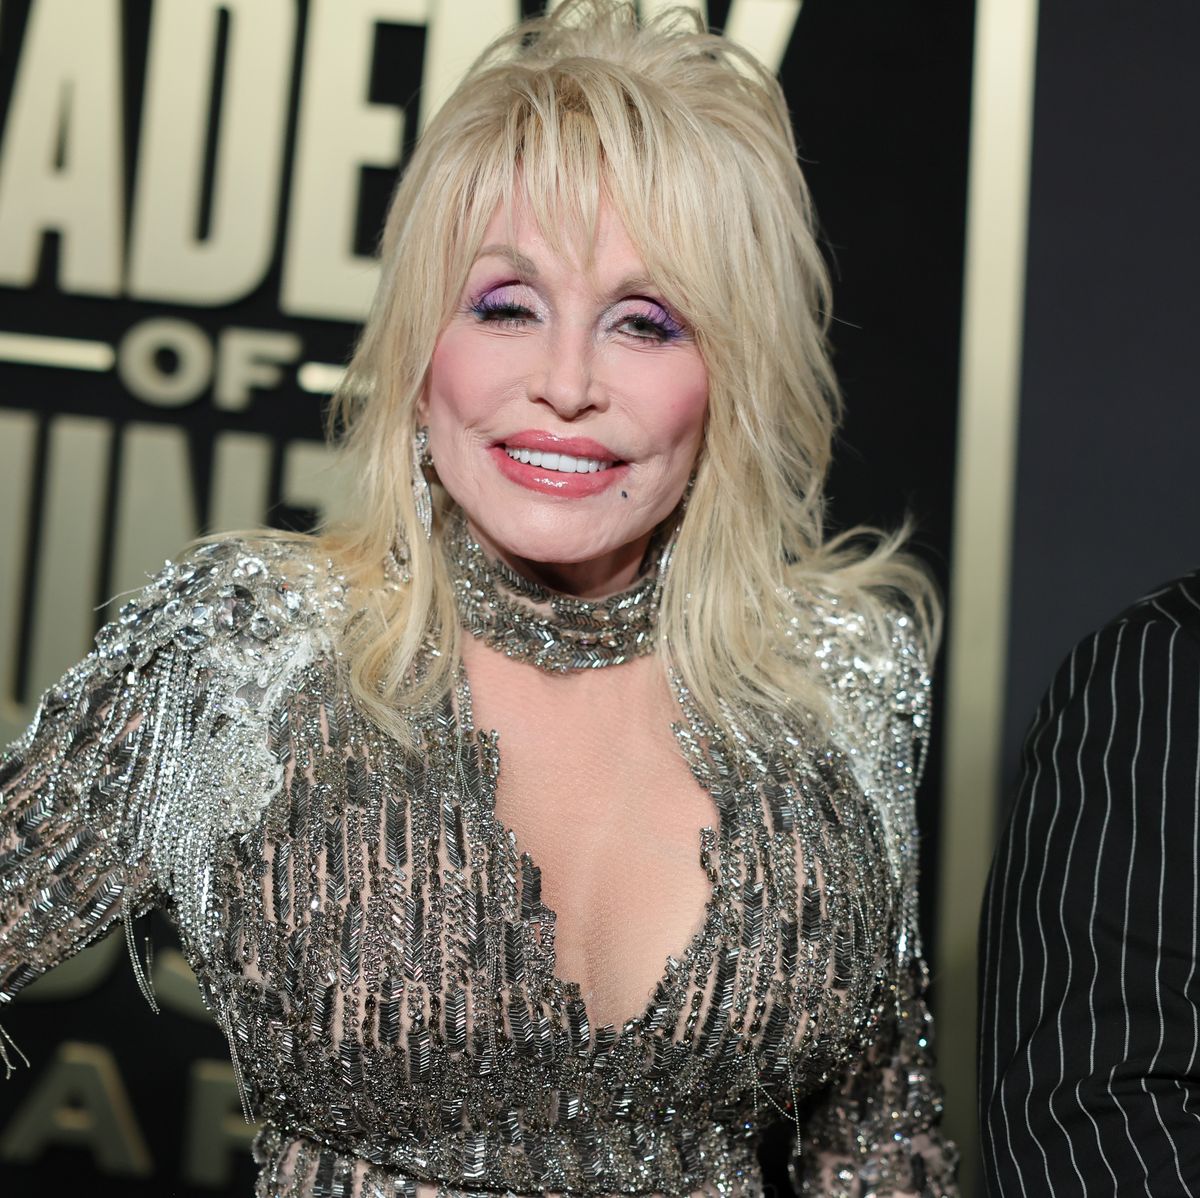 Dolly Parton, 77, Wears Fishnets and Leather Bodysuit, Debuting New Look